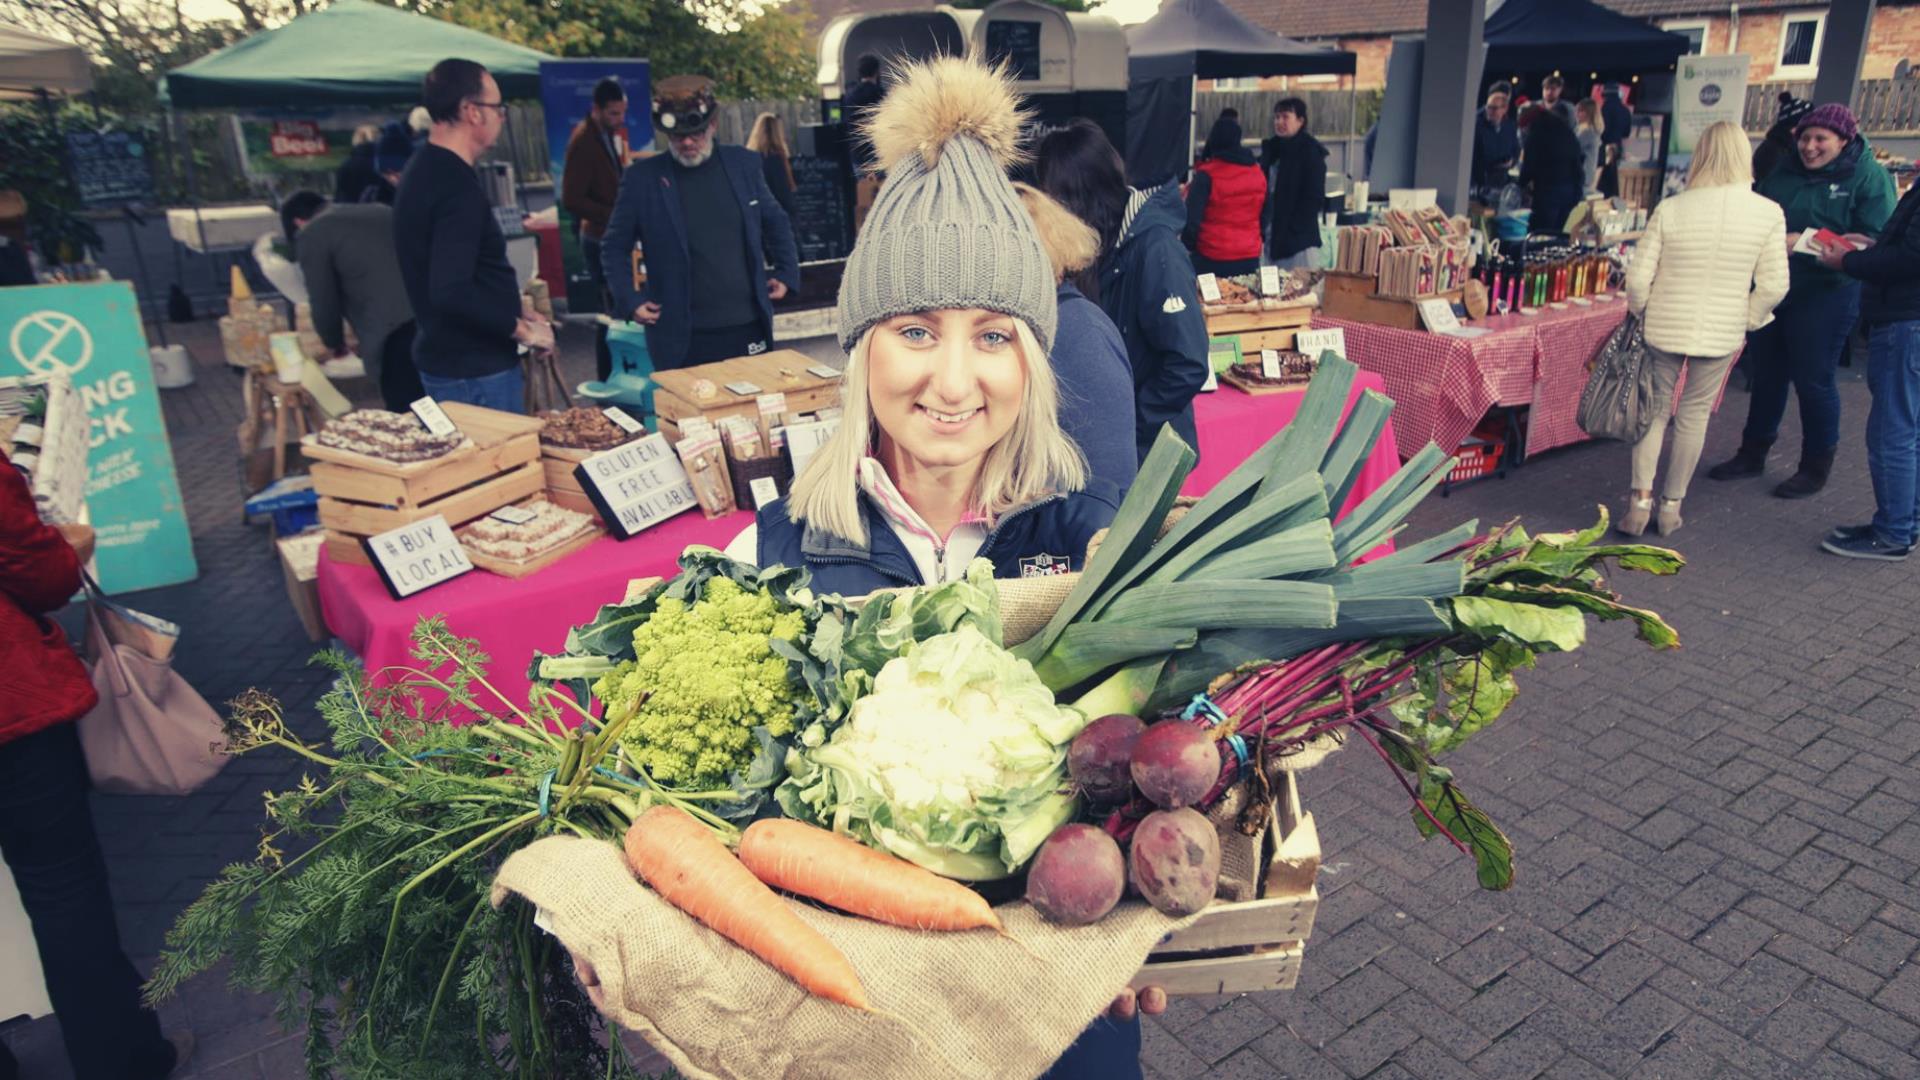 Image of Ashleigh from Cherry Valley Farm - a vegetable farm with market goings-on in the background